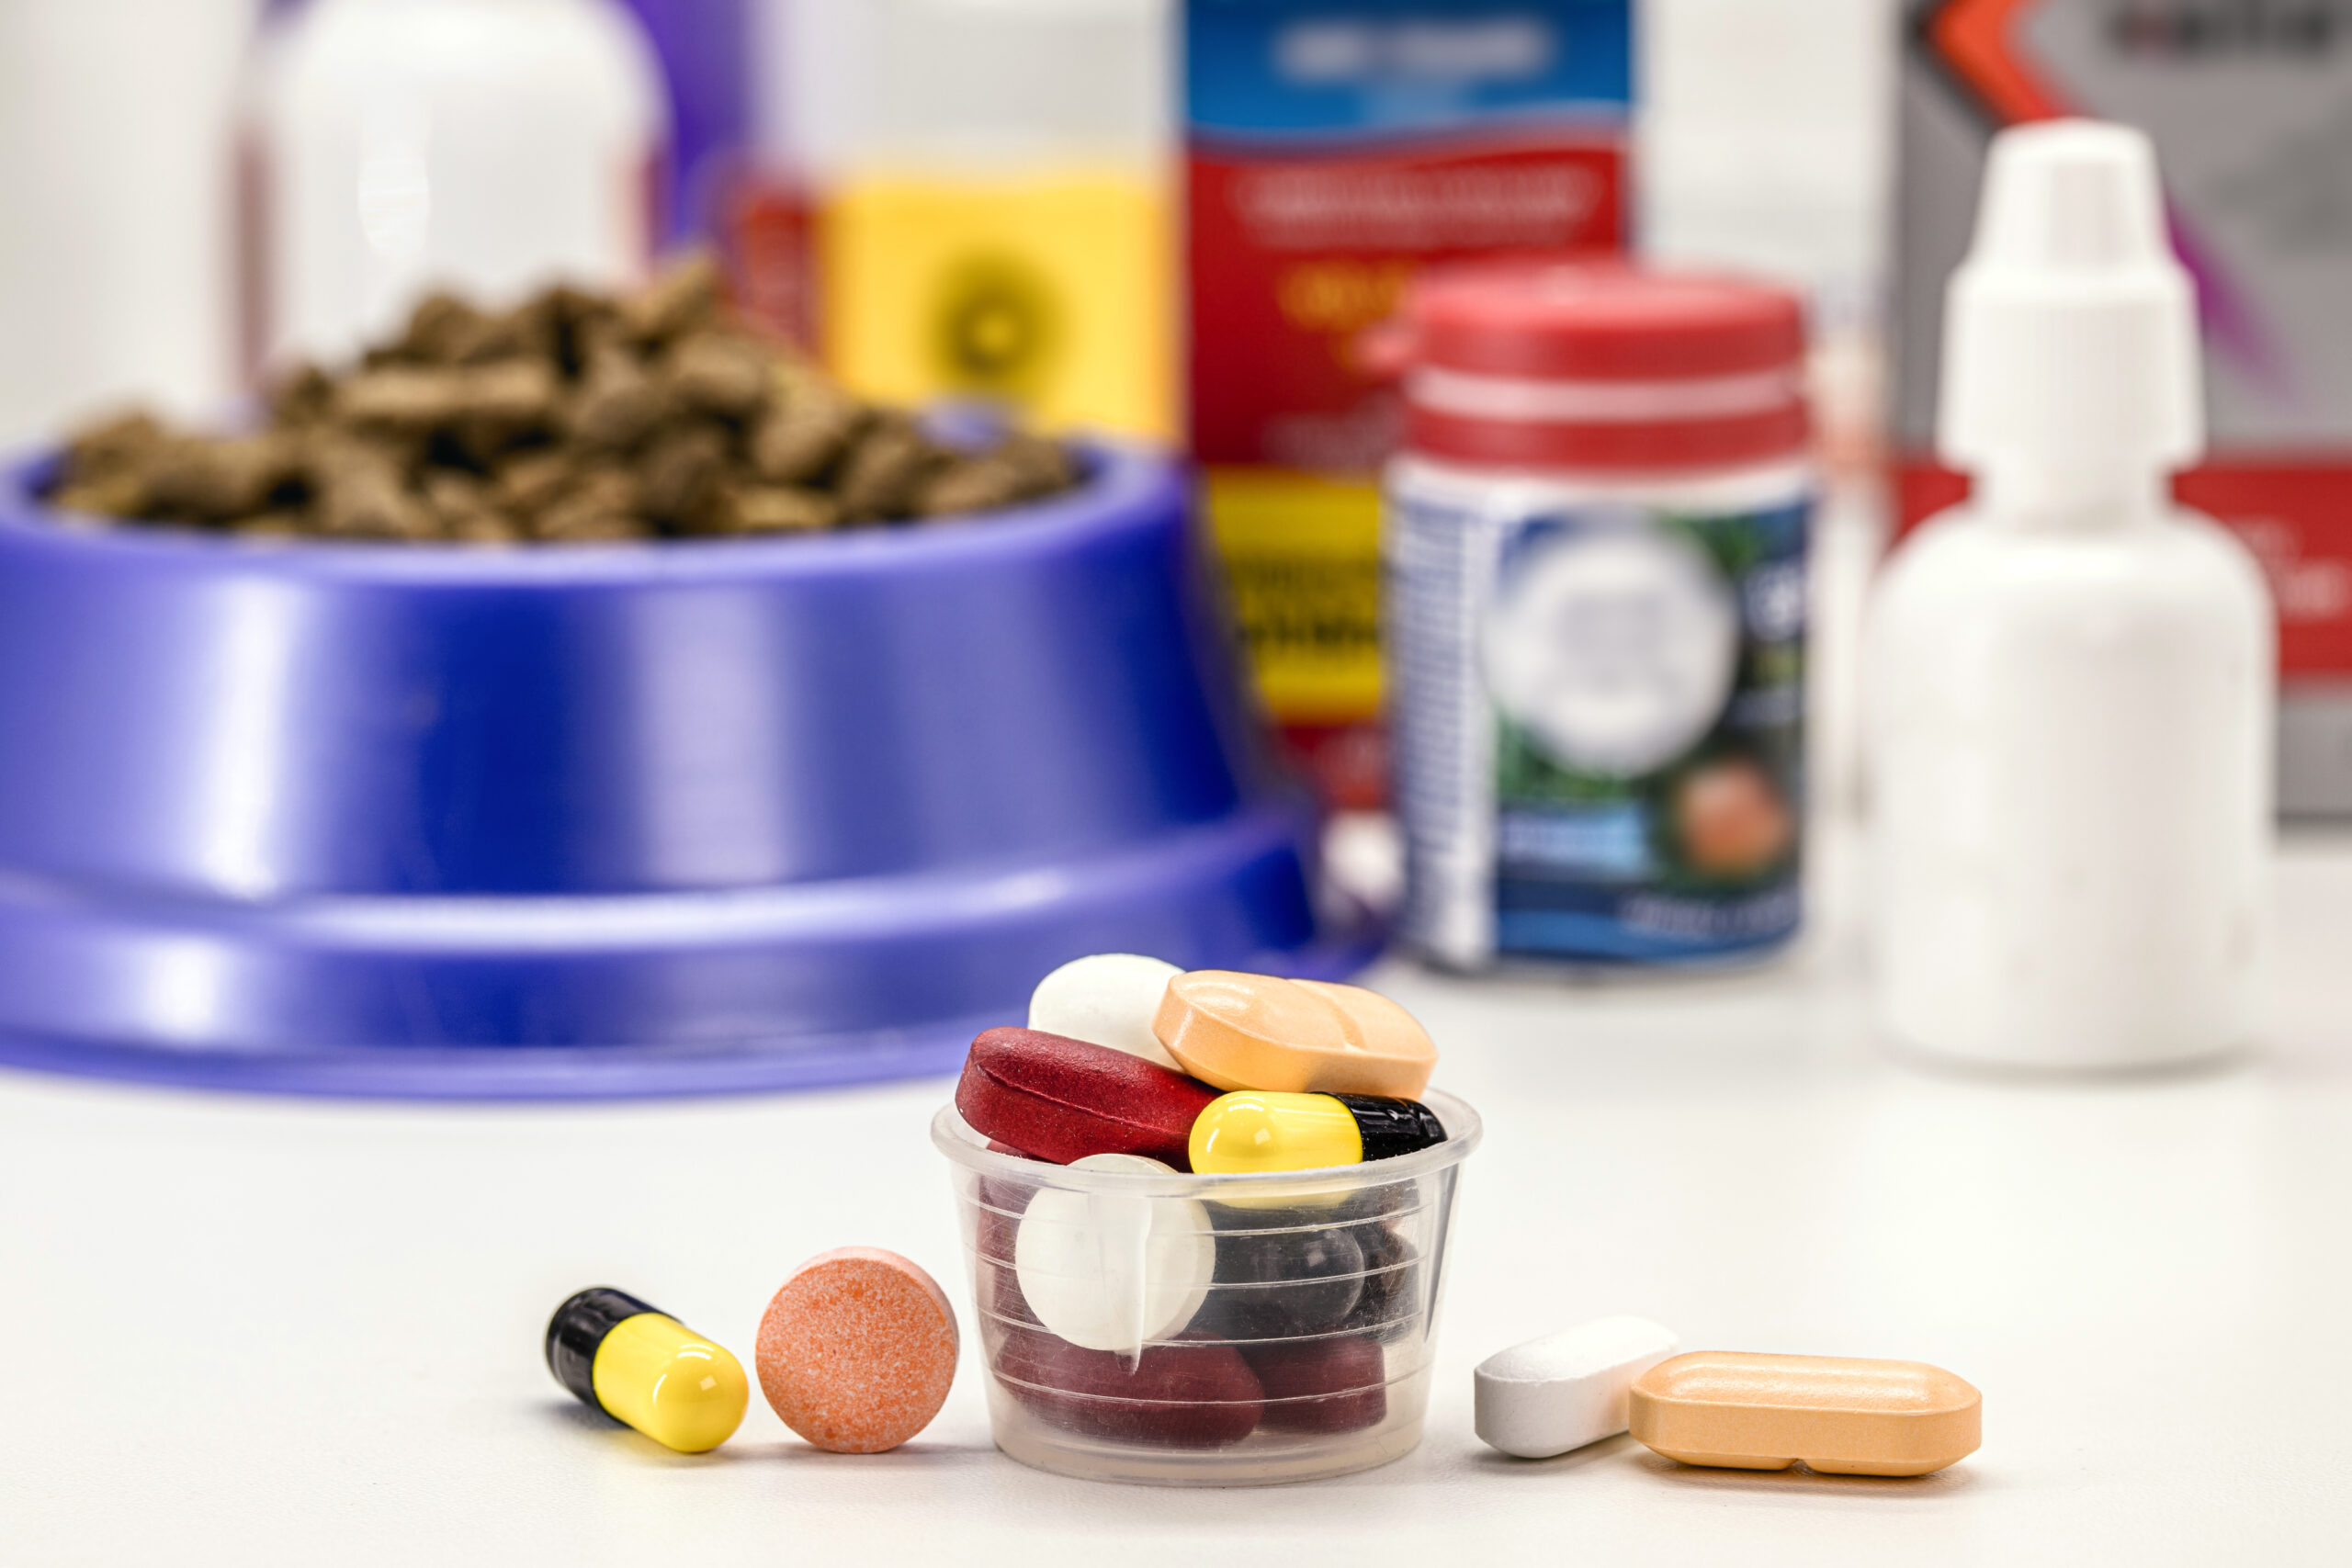 veterinary pills or heartworm medication, pet medication, pet supplements or vitamins, with pet food in the background